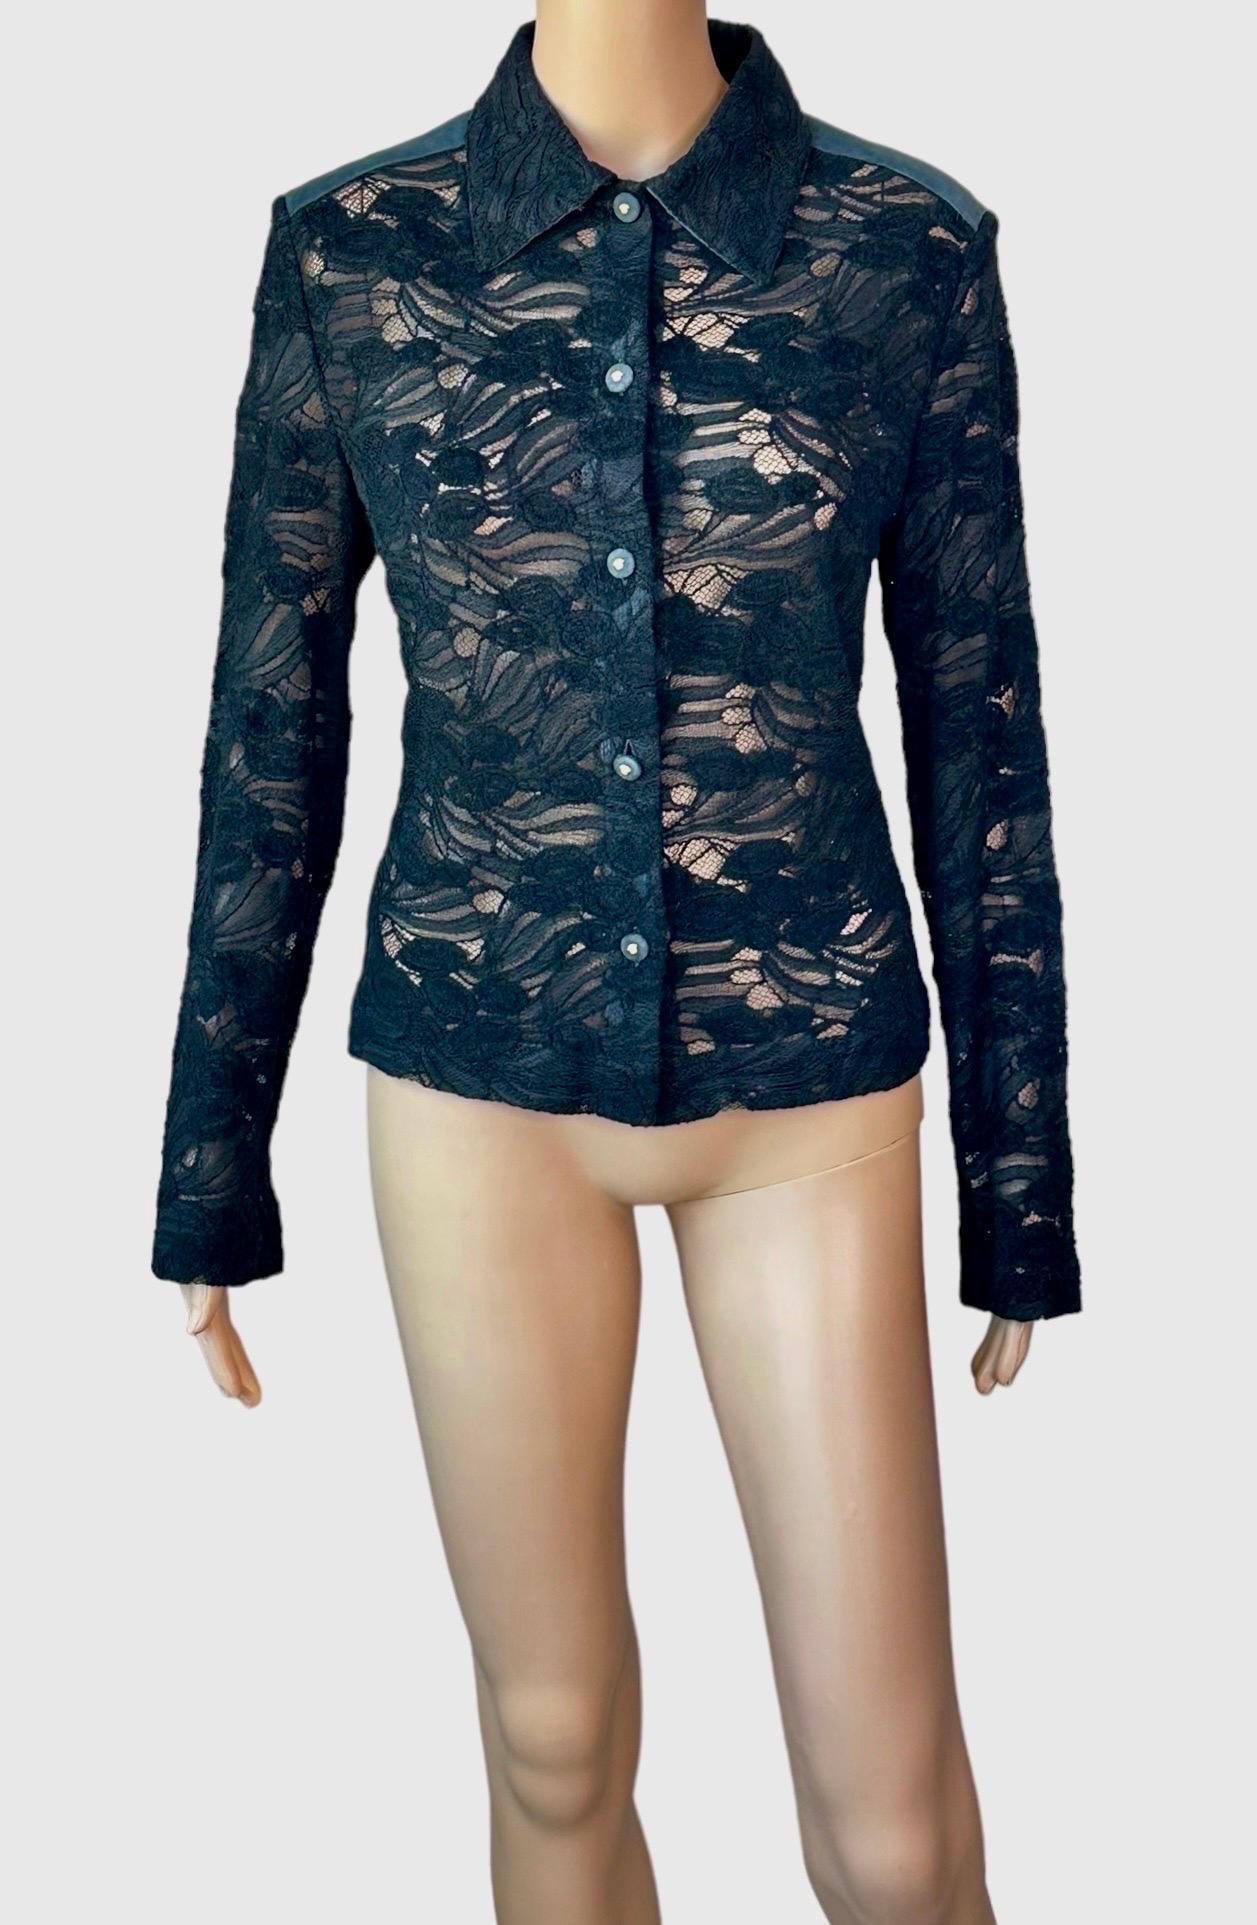 Gianni Versace c.2001 Vintage Lace Sheer Black Shirt Top Jacket In Good Condition For Sale In Naples, FL